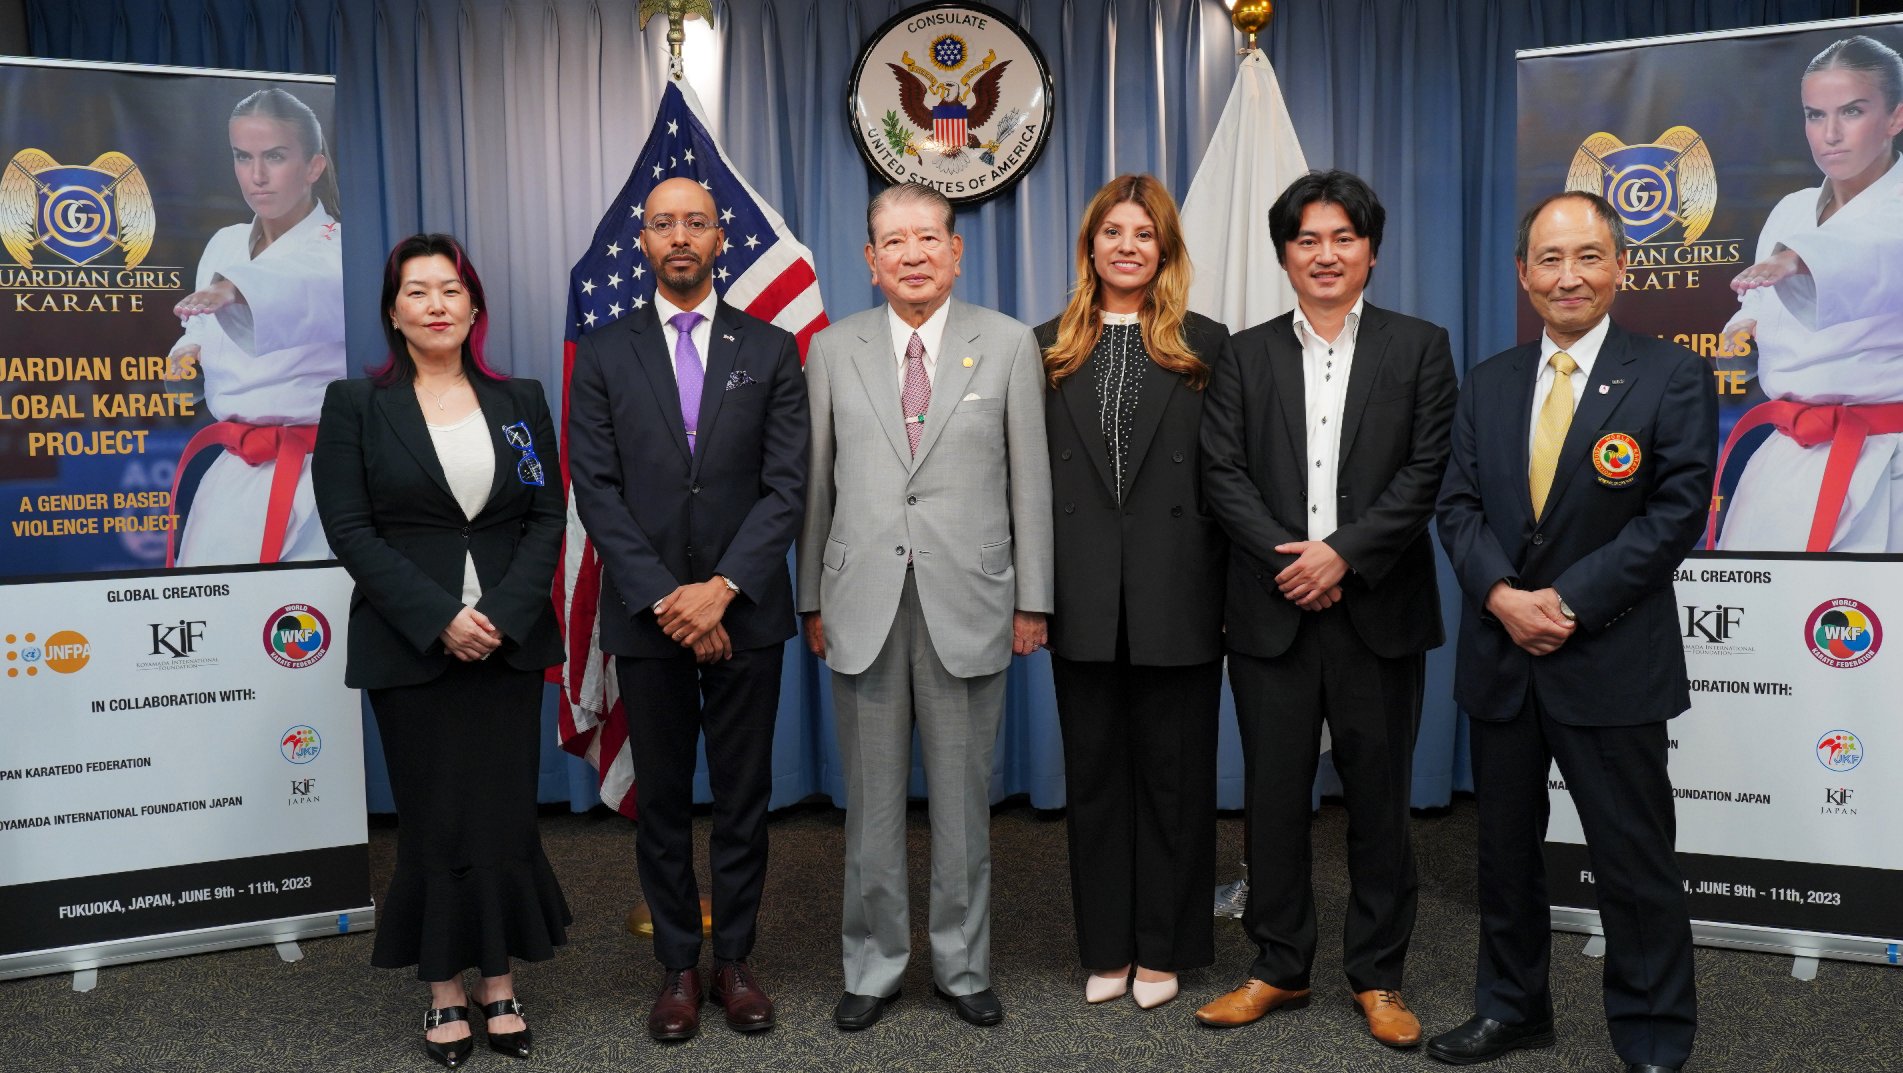 Guardian Girls Karate Project presented in Japan with the cooperation of the United States Consulate in Fukuoka